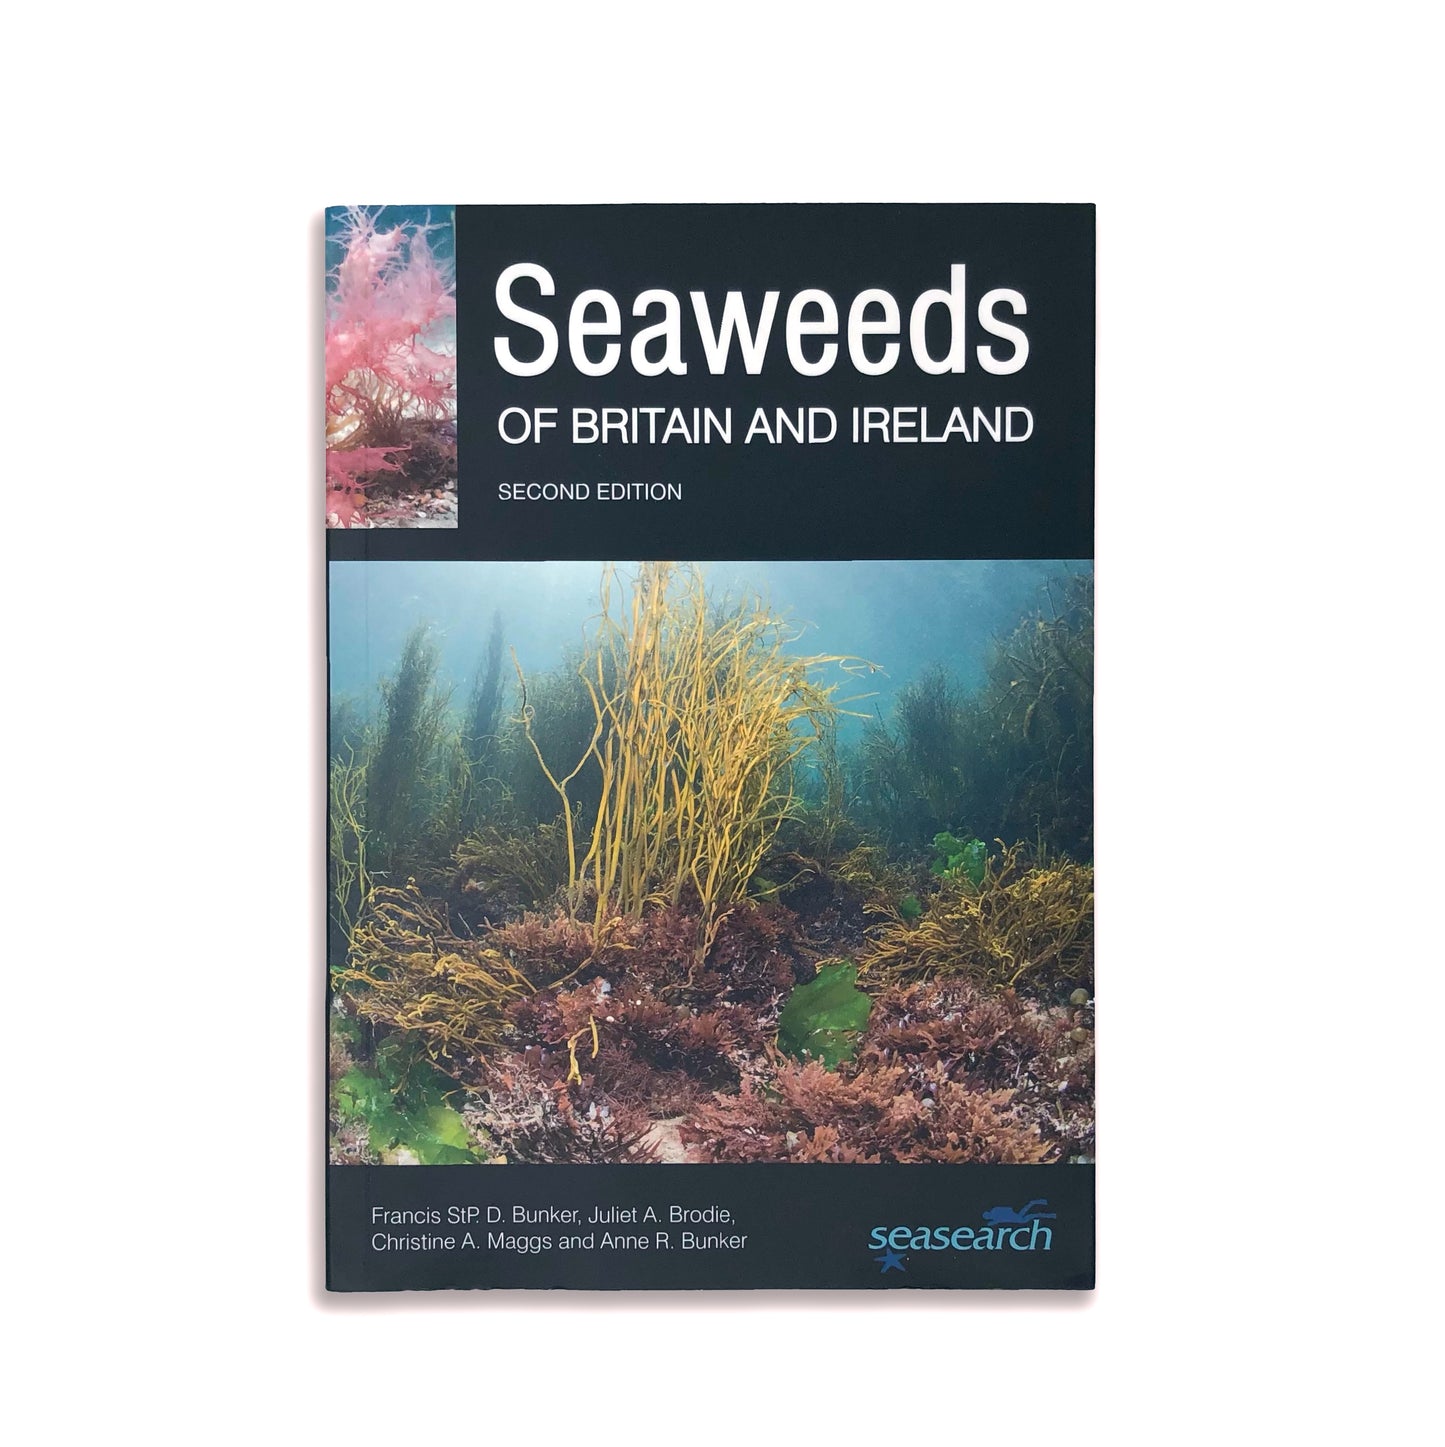 Seaweeds of Britain and Ireland - Francis D. Bunker, Juliet A. Brodie, Christine A. Maggs, and Anne R. Bunker (paperback)